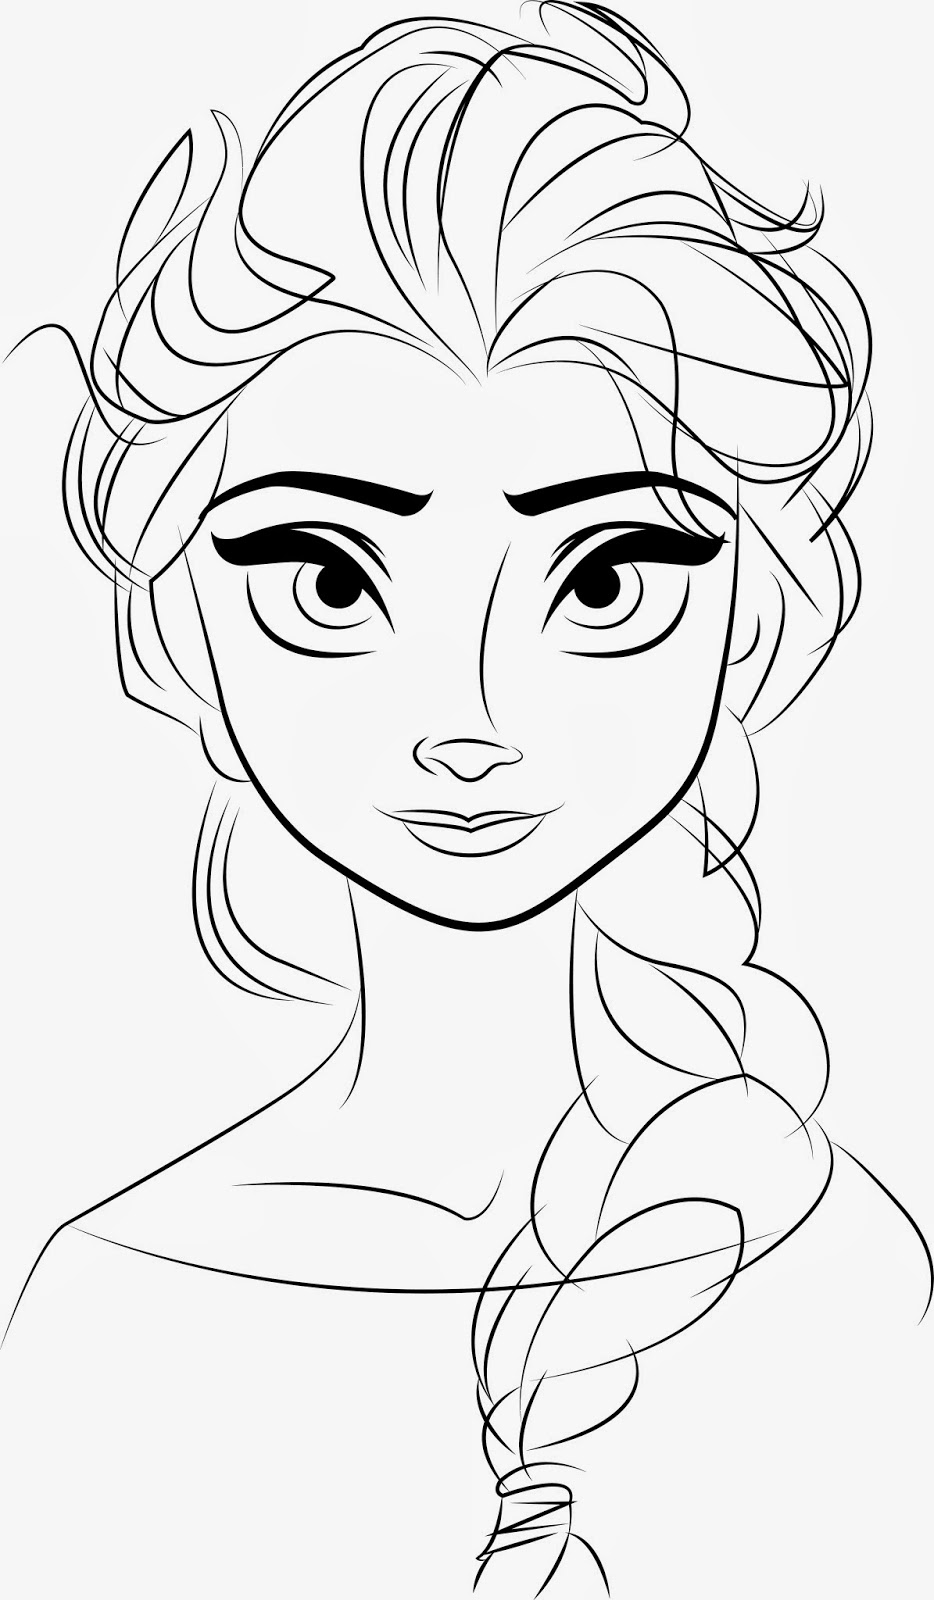 Download Free Printable Elsa Coloring Pages for Kids - Best Coloring Pages For Kids